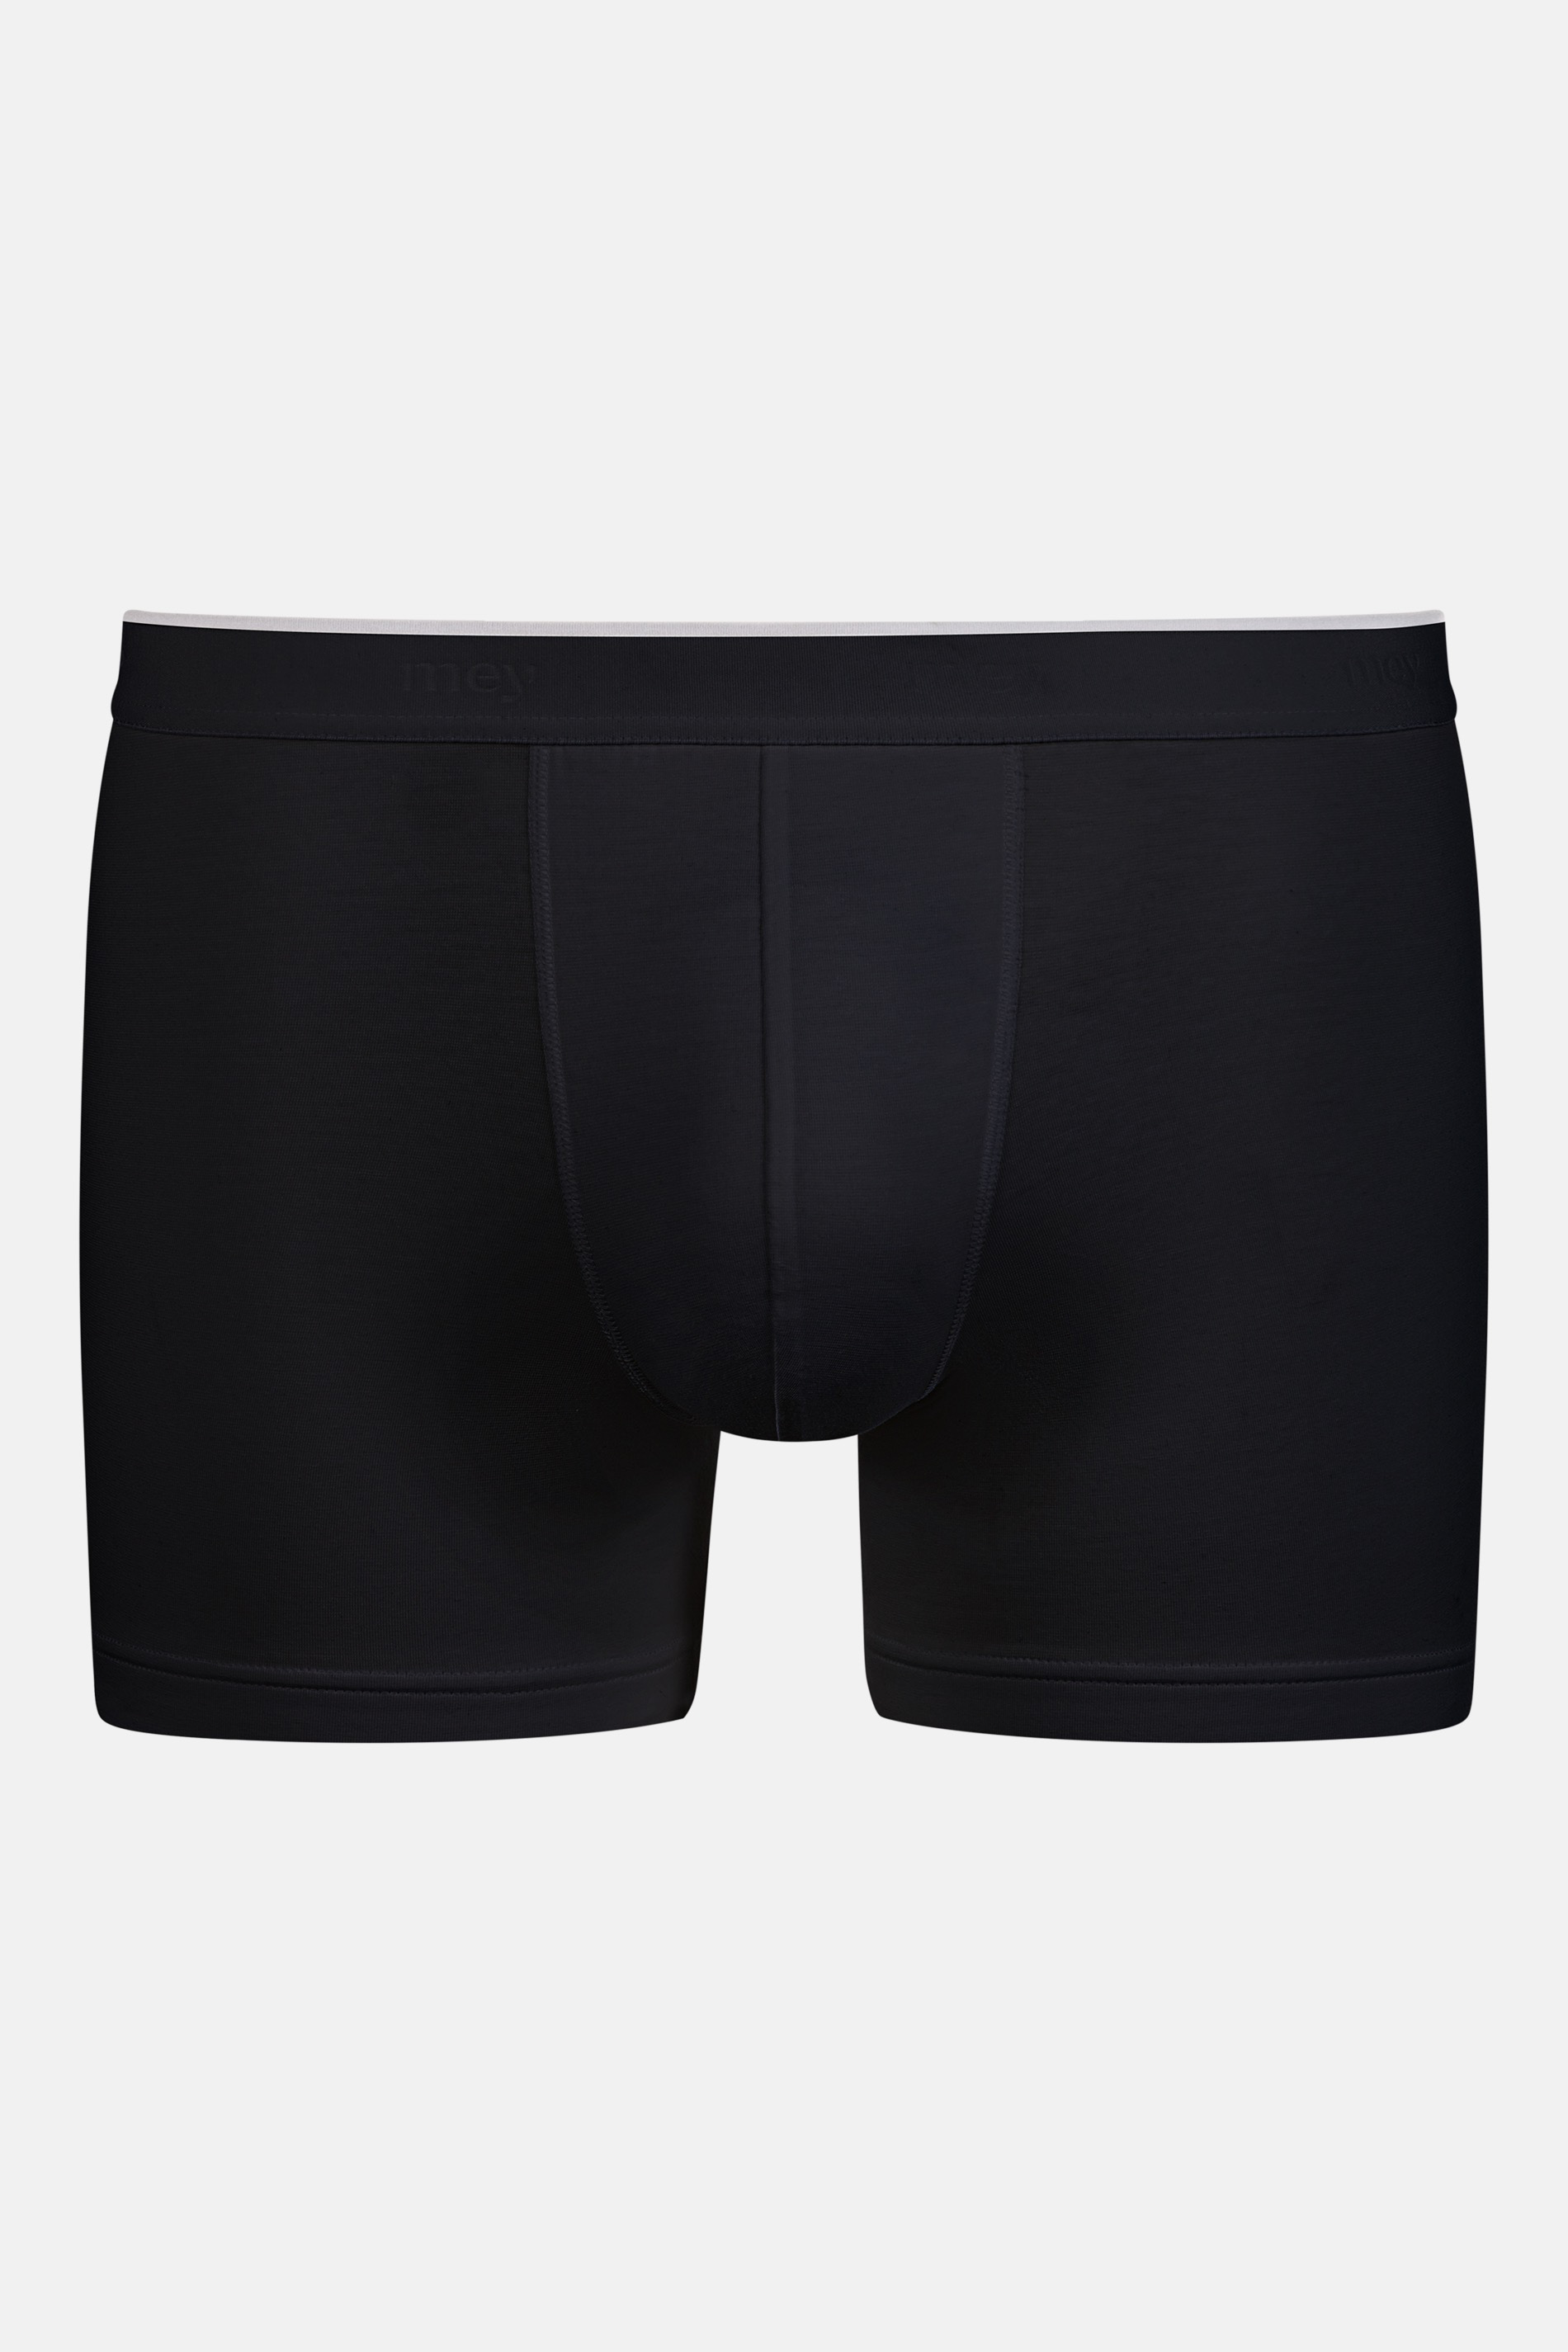 Shorty Serie Dry Cotton Uitknippen | mey®